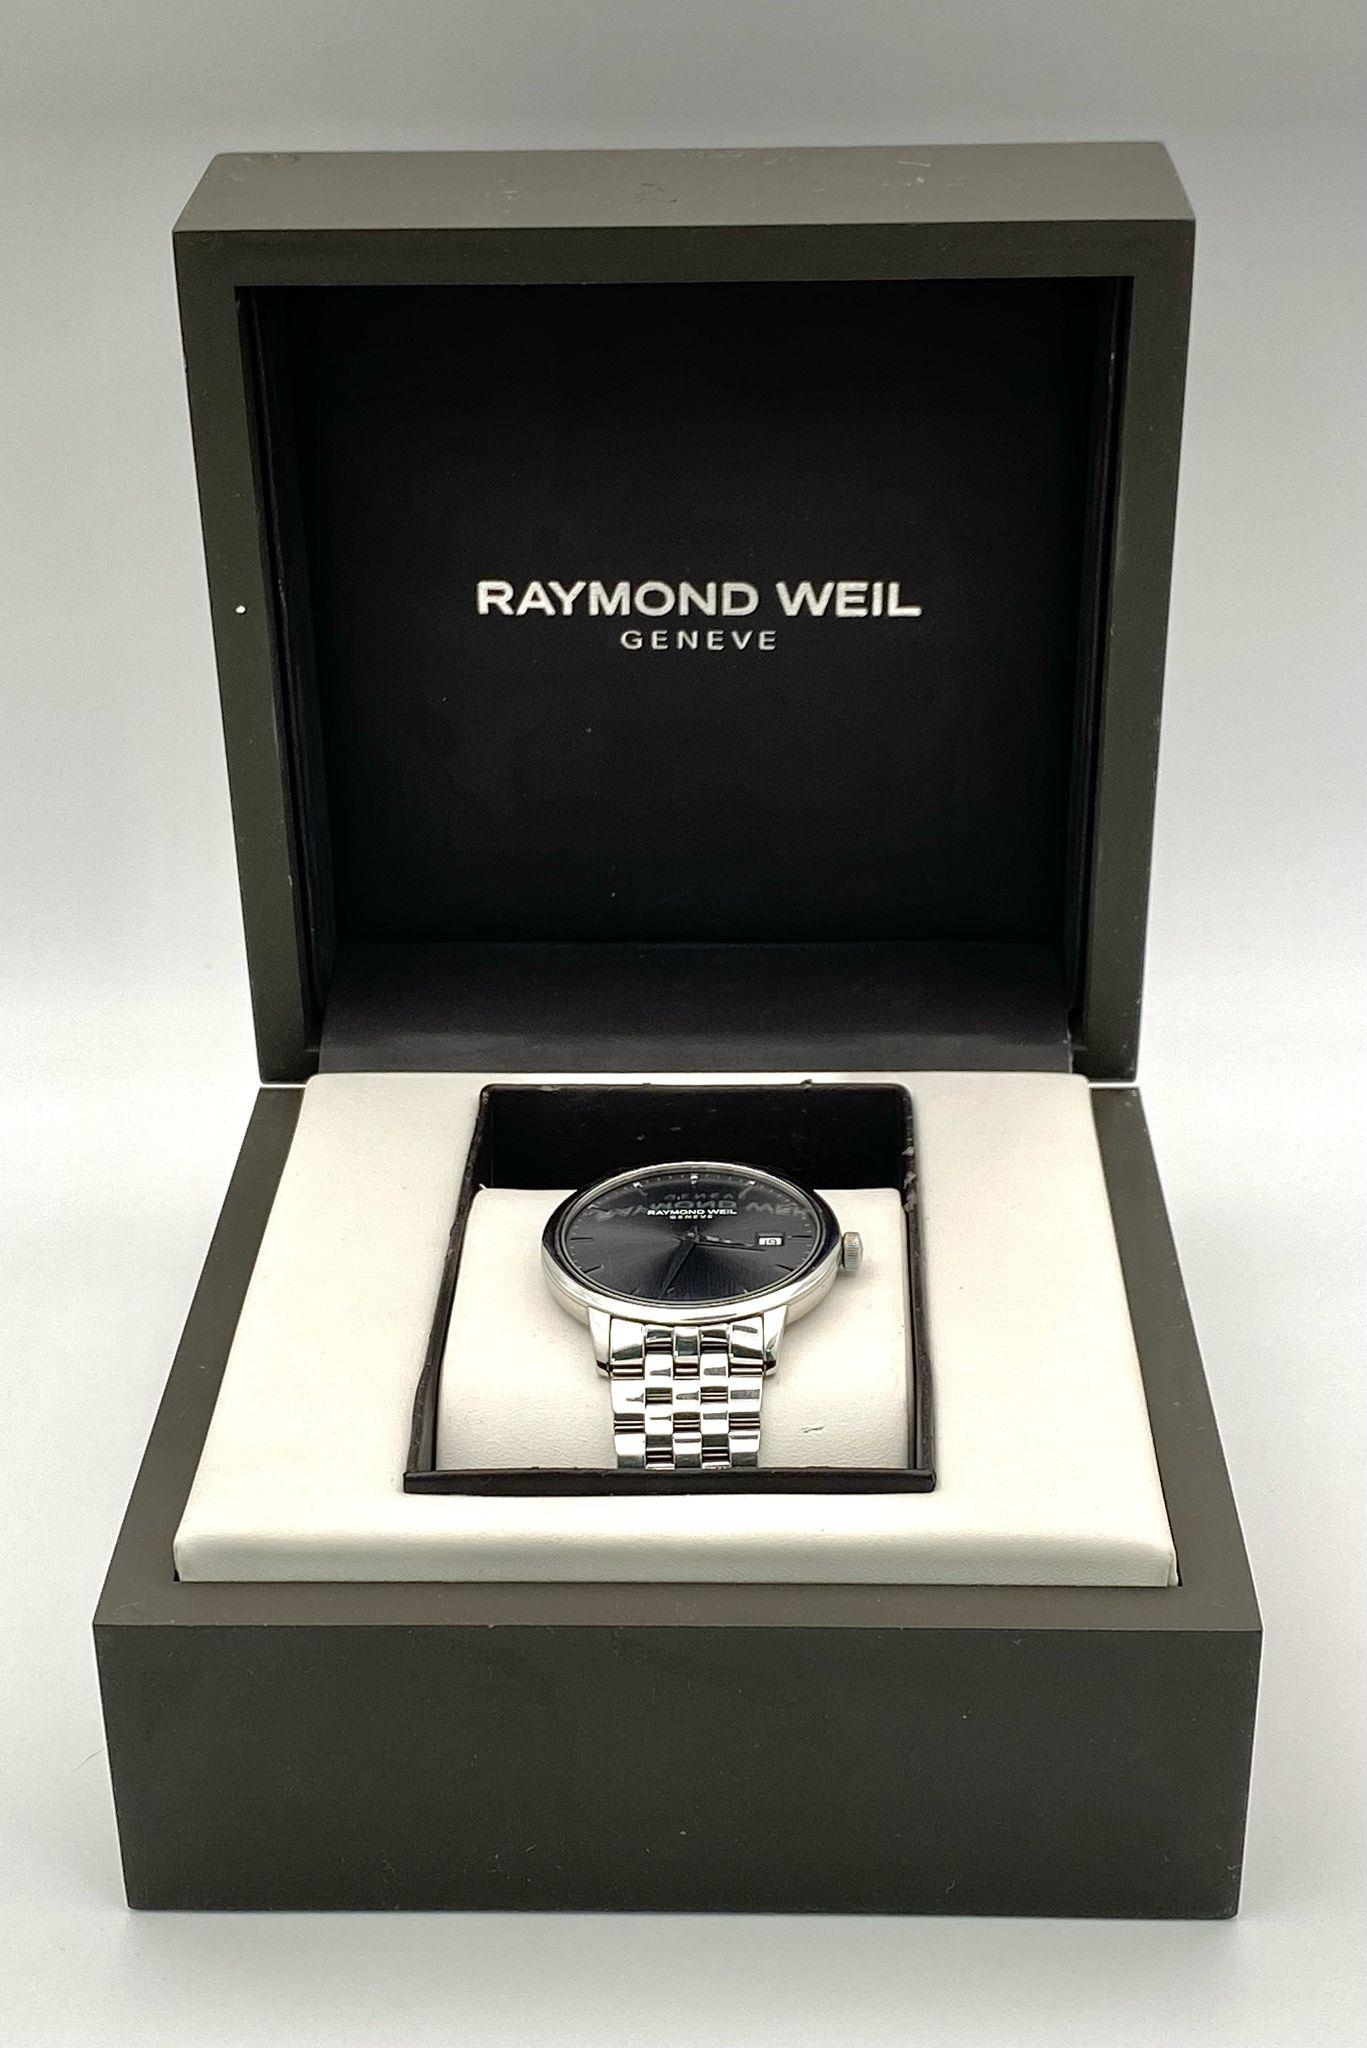 A Classic Raymond Weil Geneve Quartz Gents Watch. Stainless steel bracelet and case - 39mm. Silver - Image 10 of 10